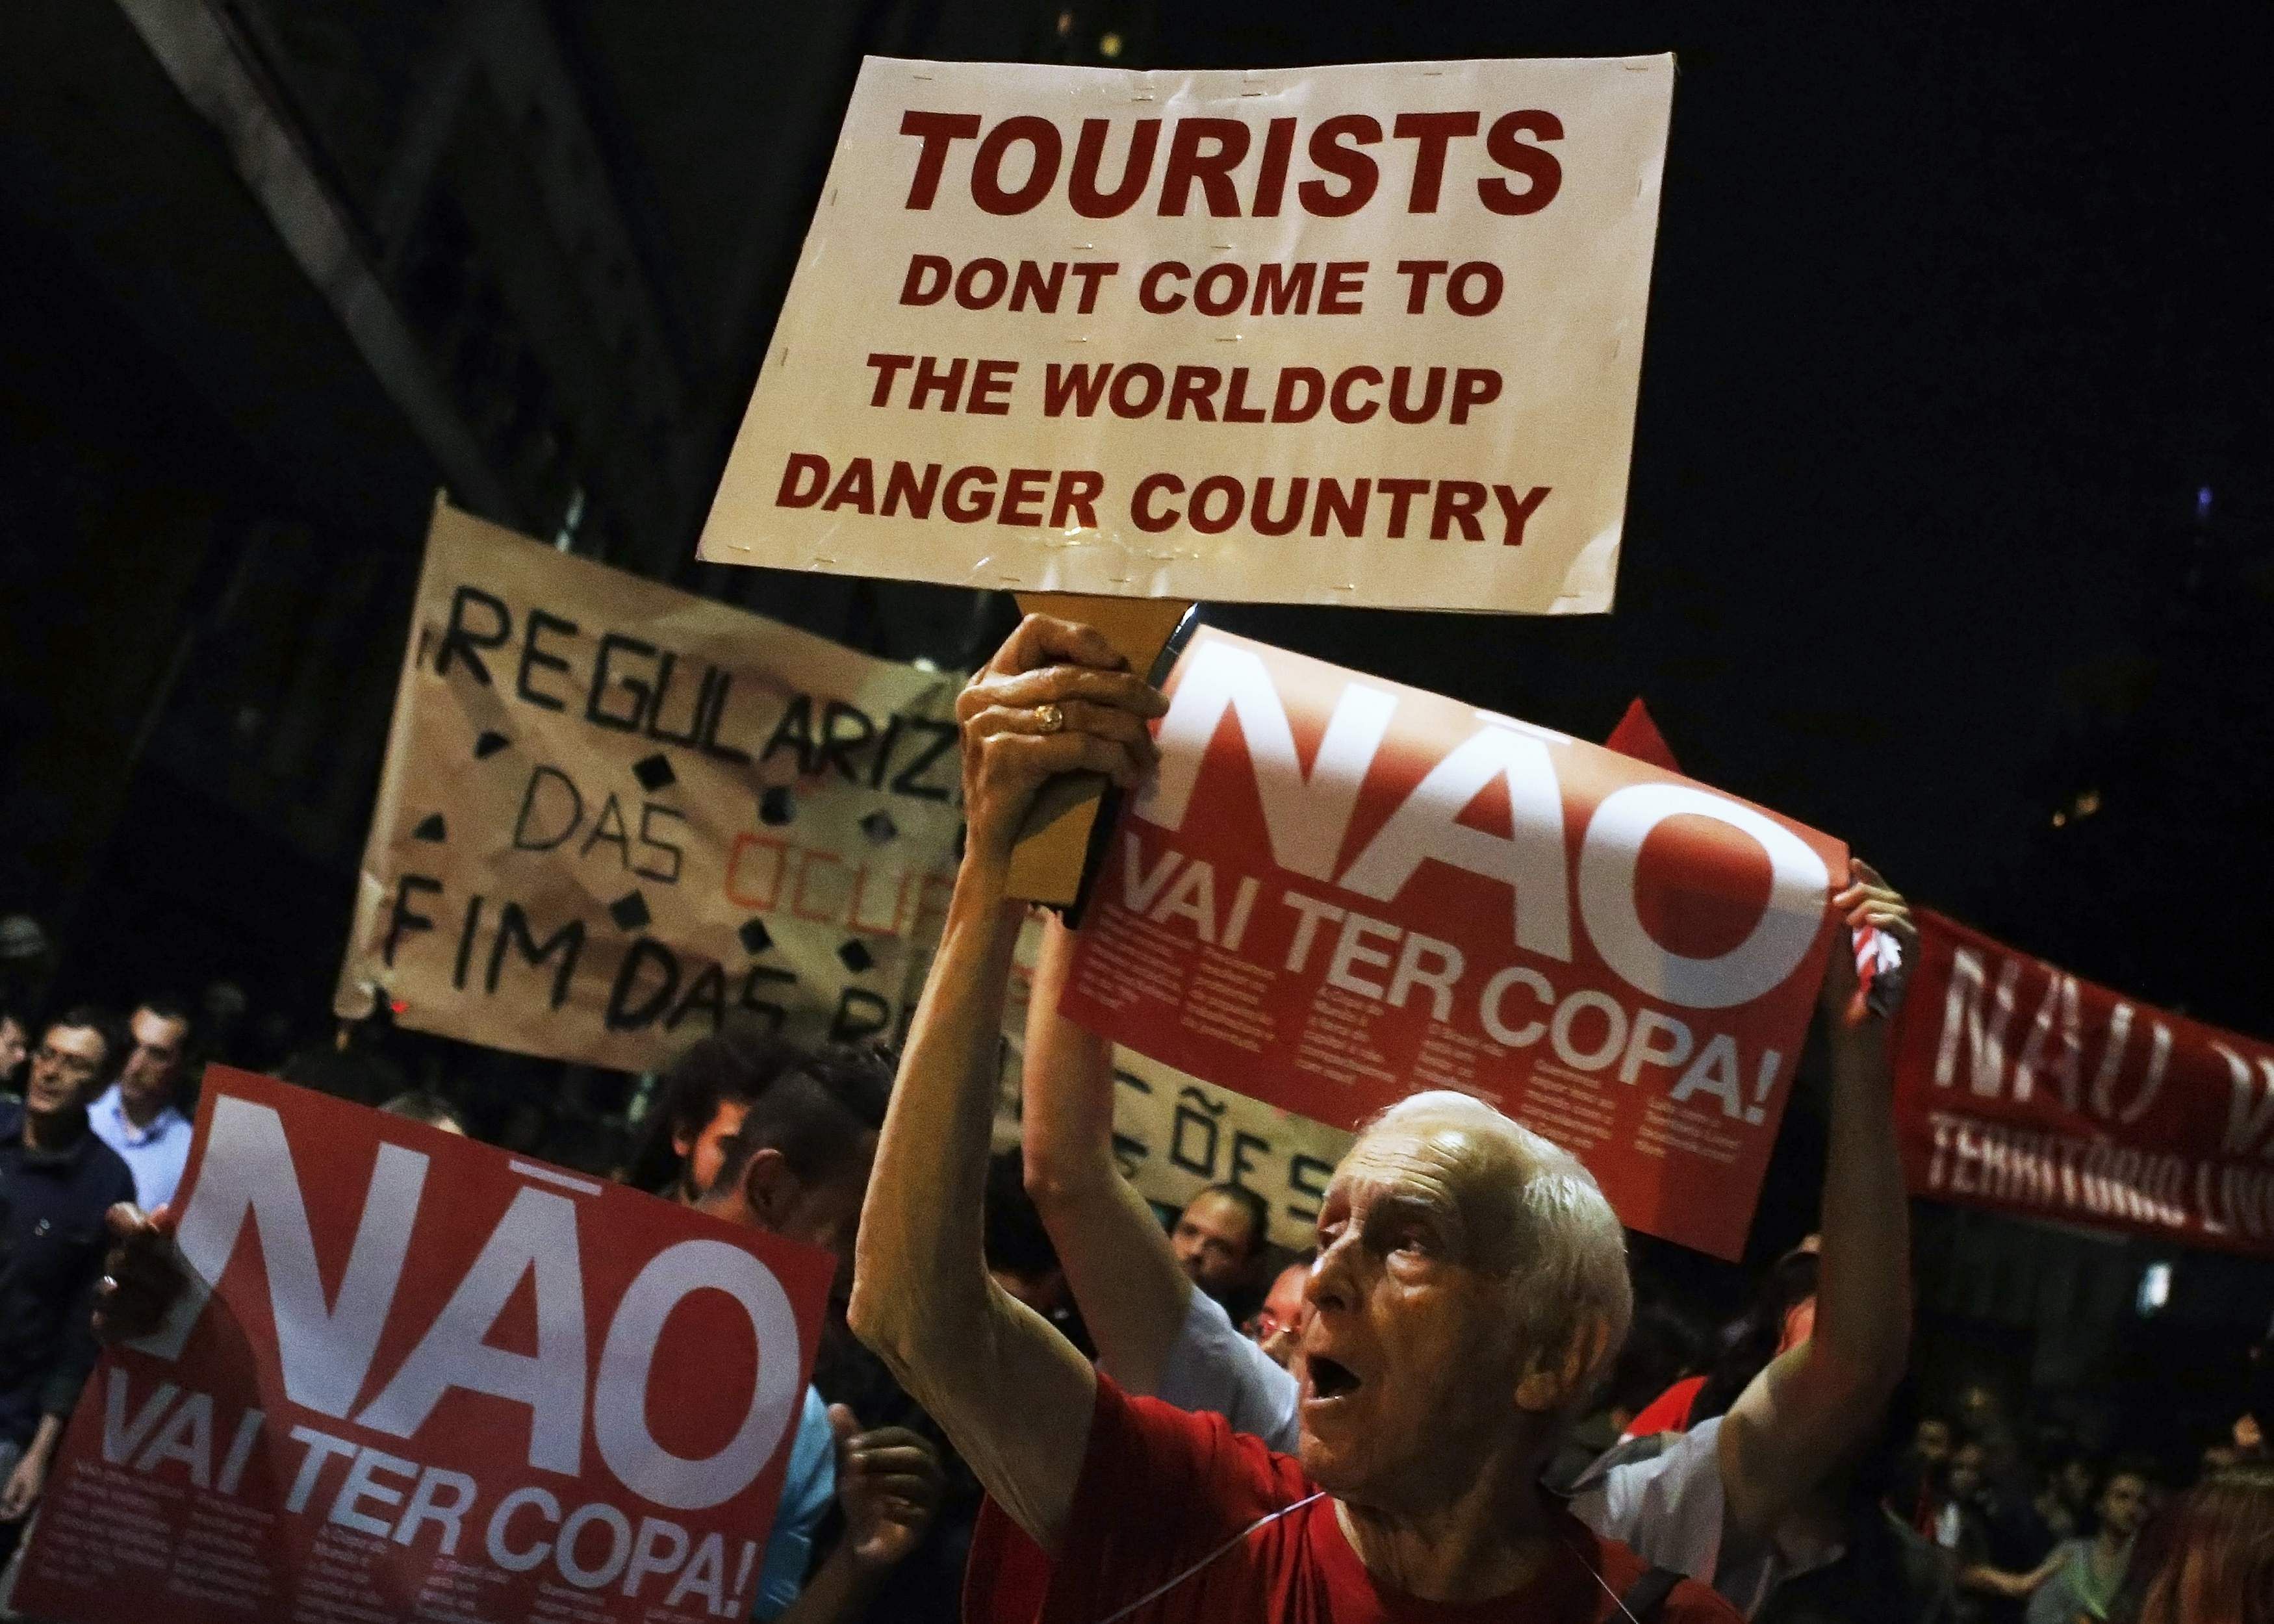 Demonstrators shout slogans during a protest against the 2014 World Cup, in Sao Paulo May 15, 2014. Photo: Reuters